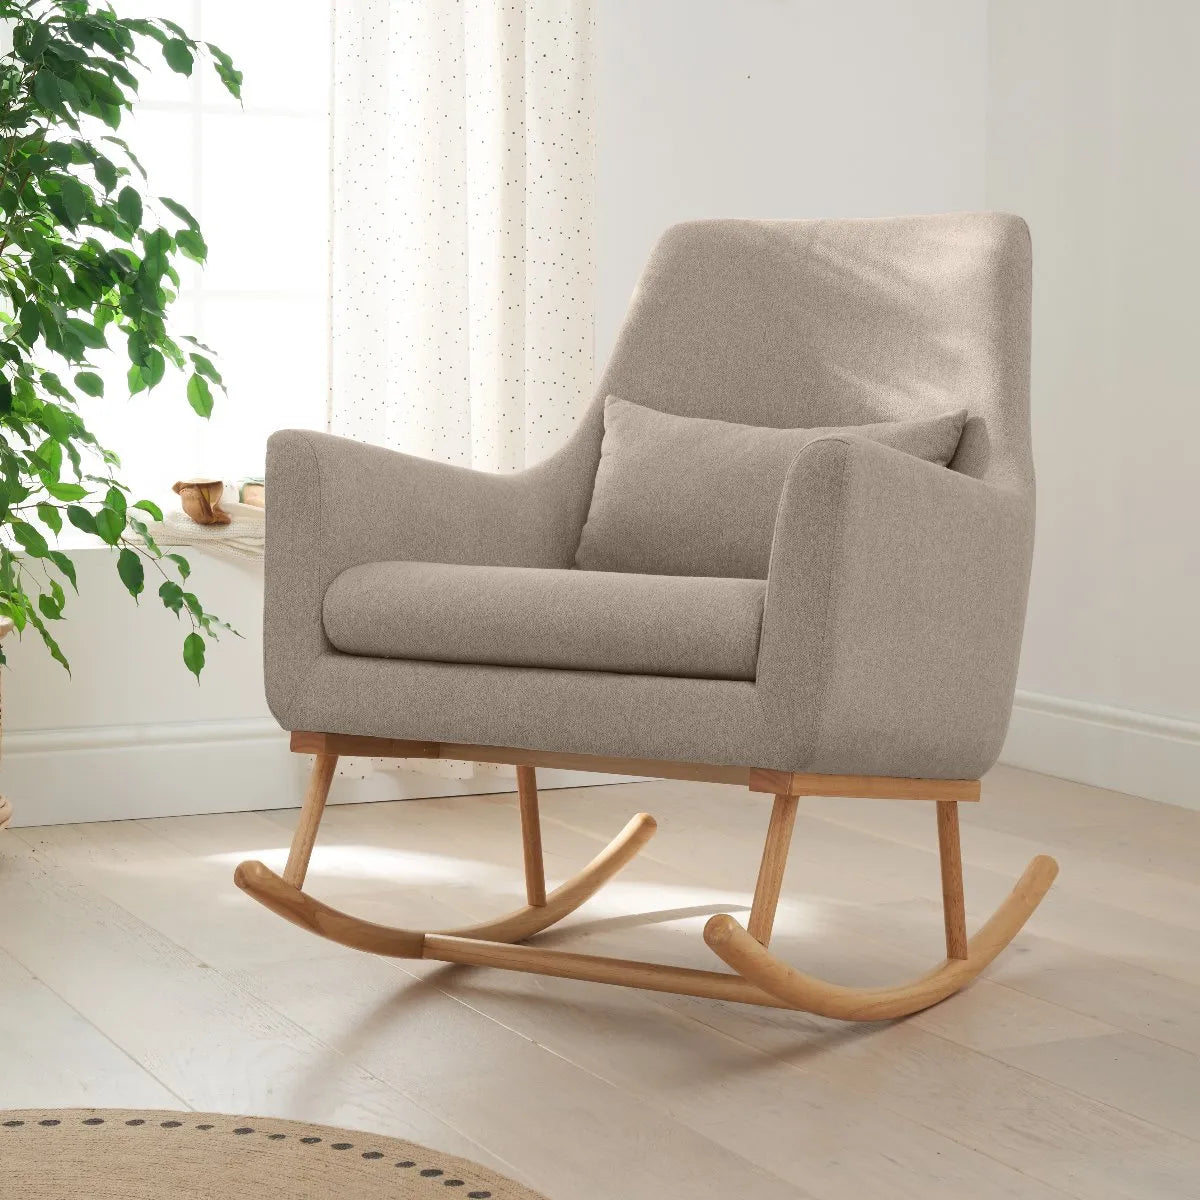 Rocking Chair Review: The Perfect Addition to Your Home